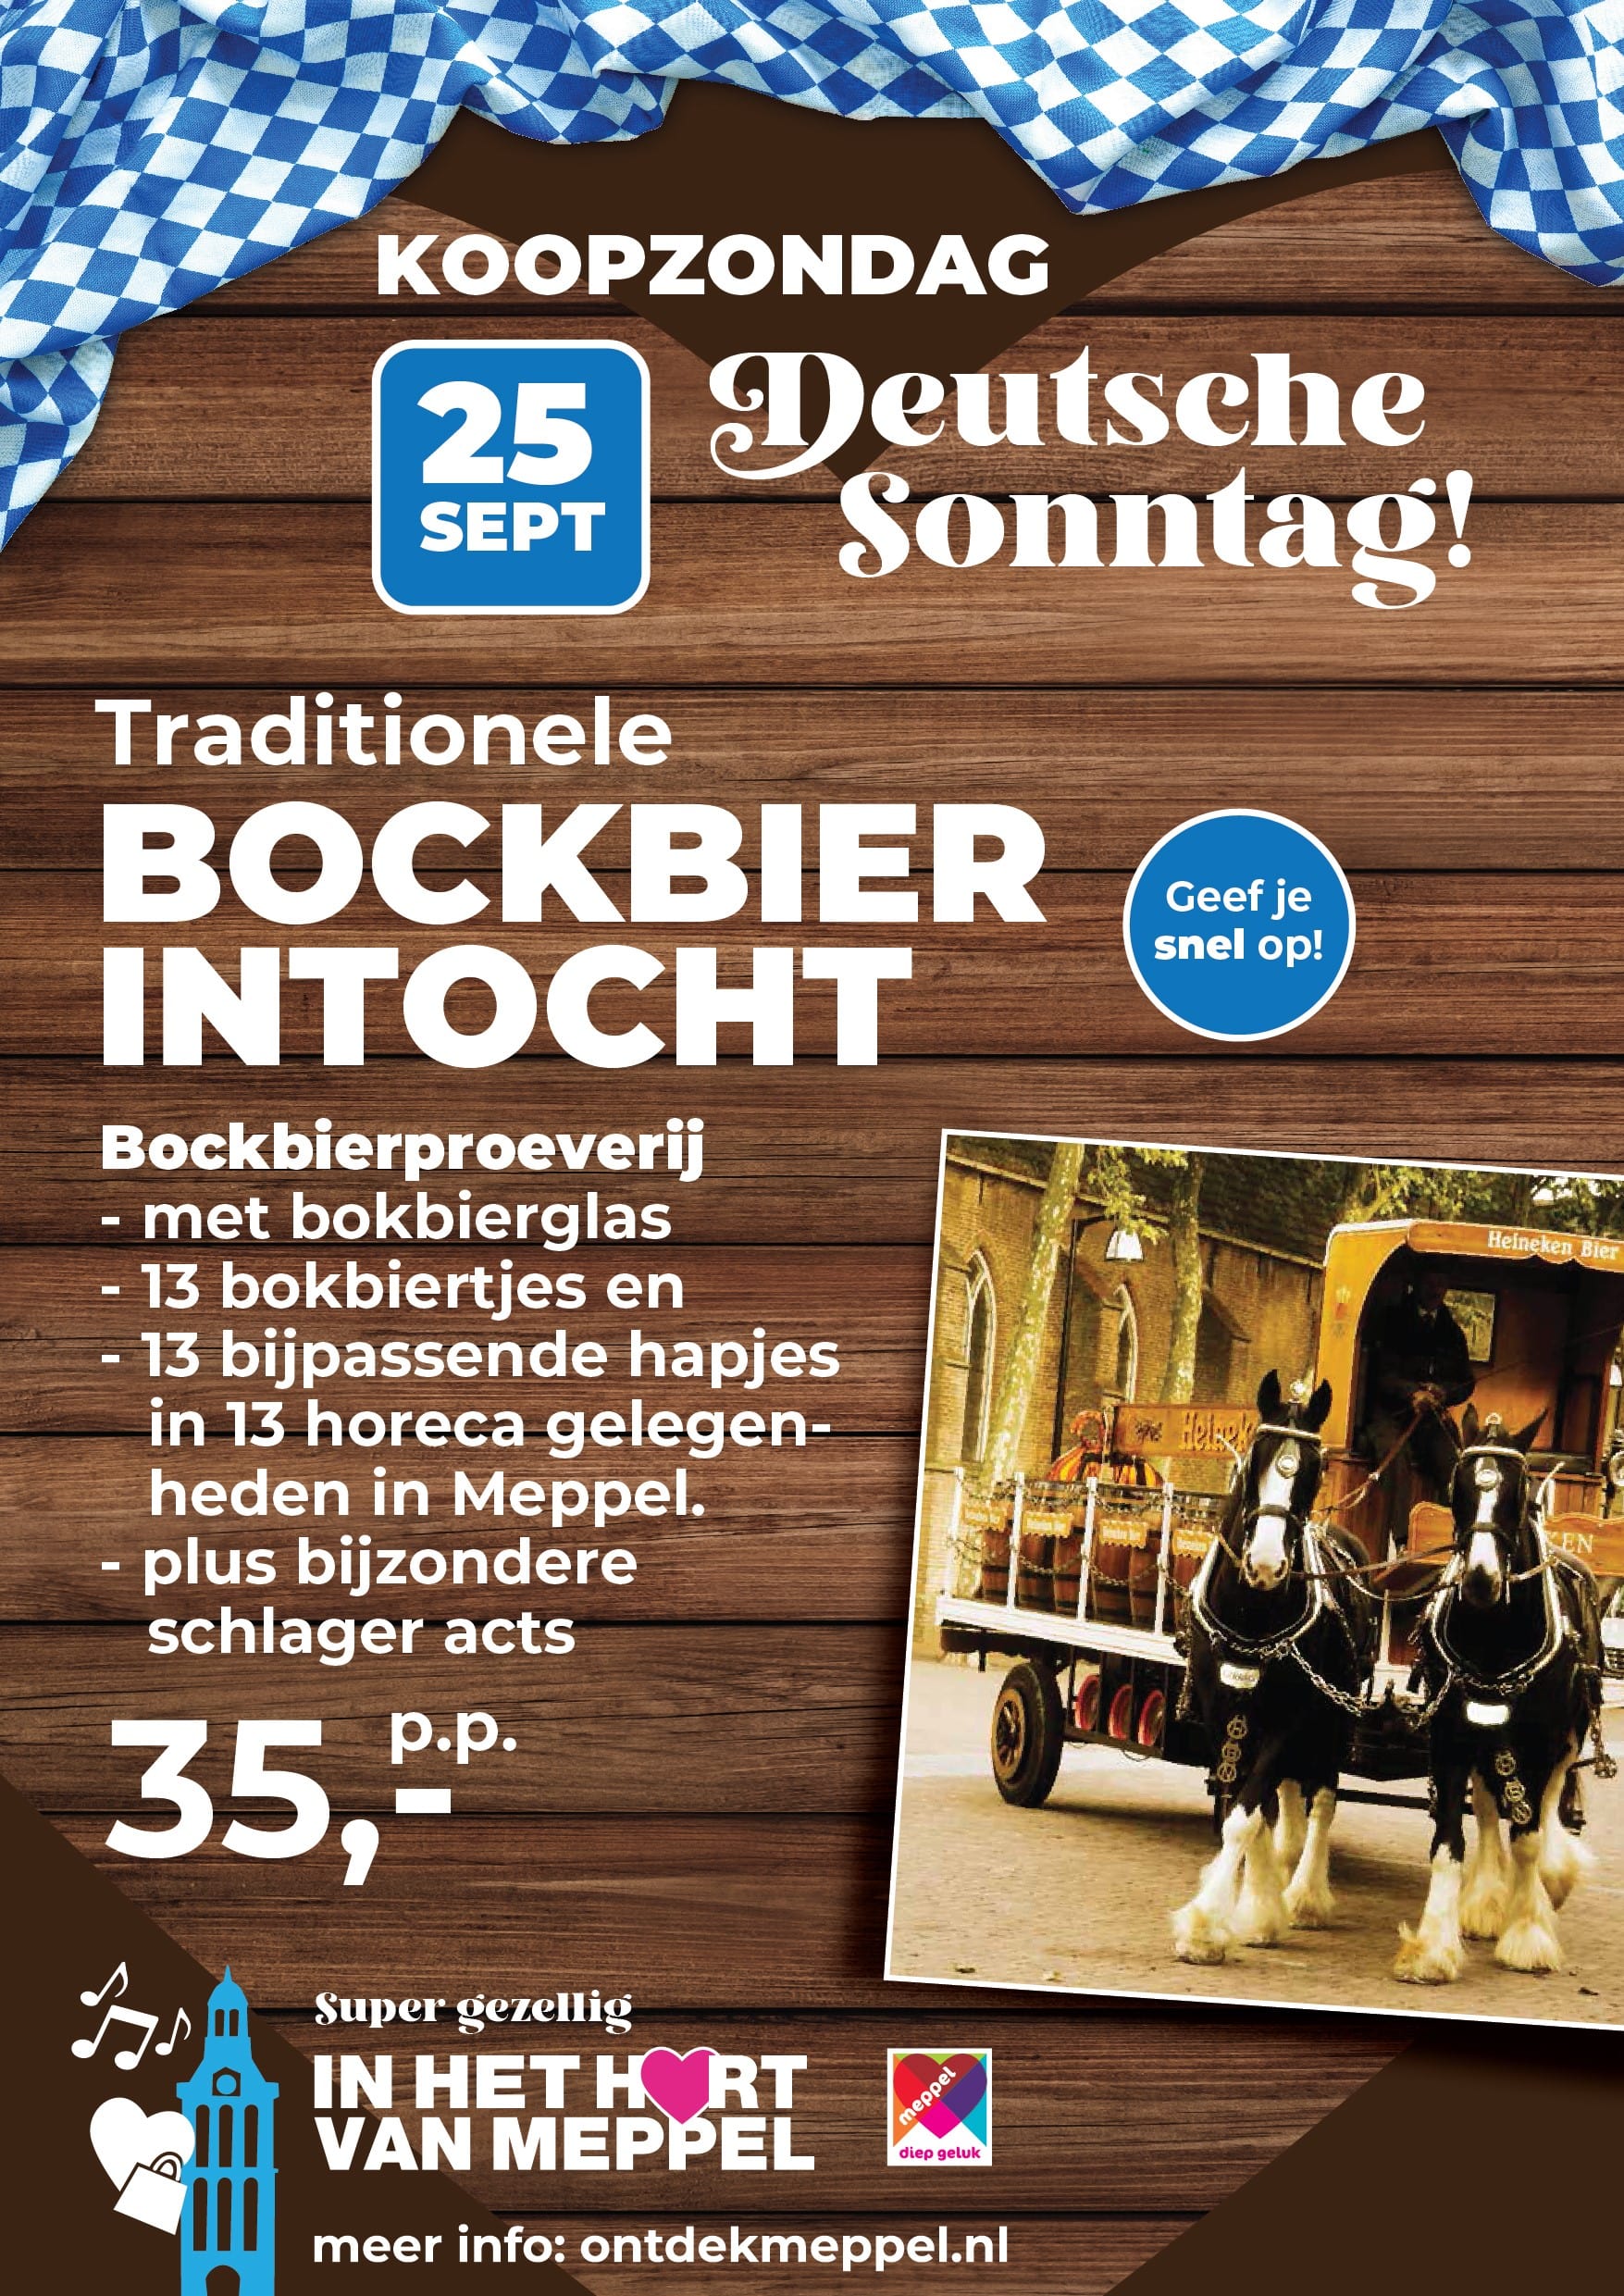 Bokbier intocht